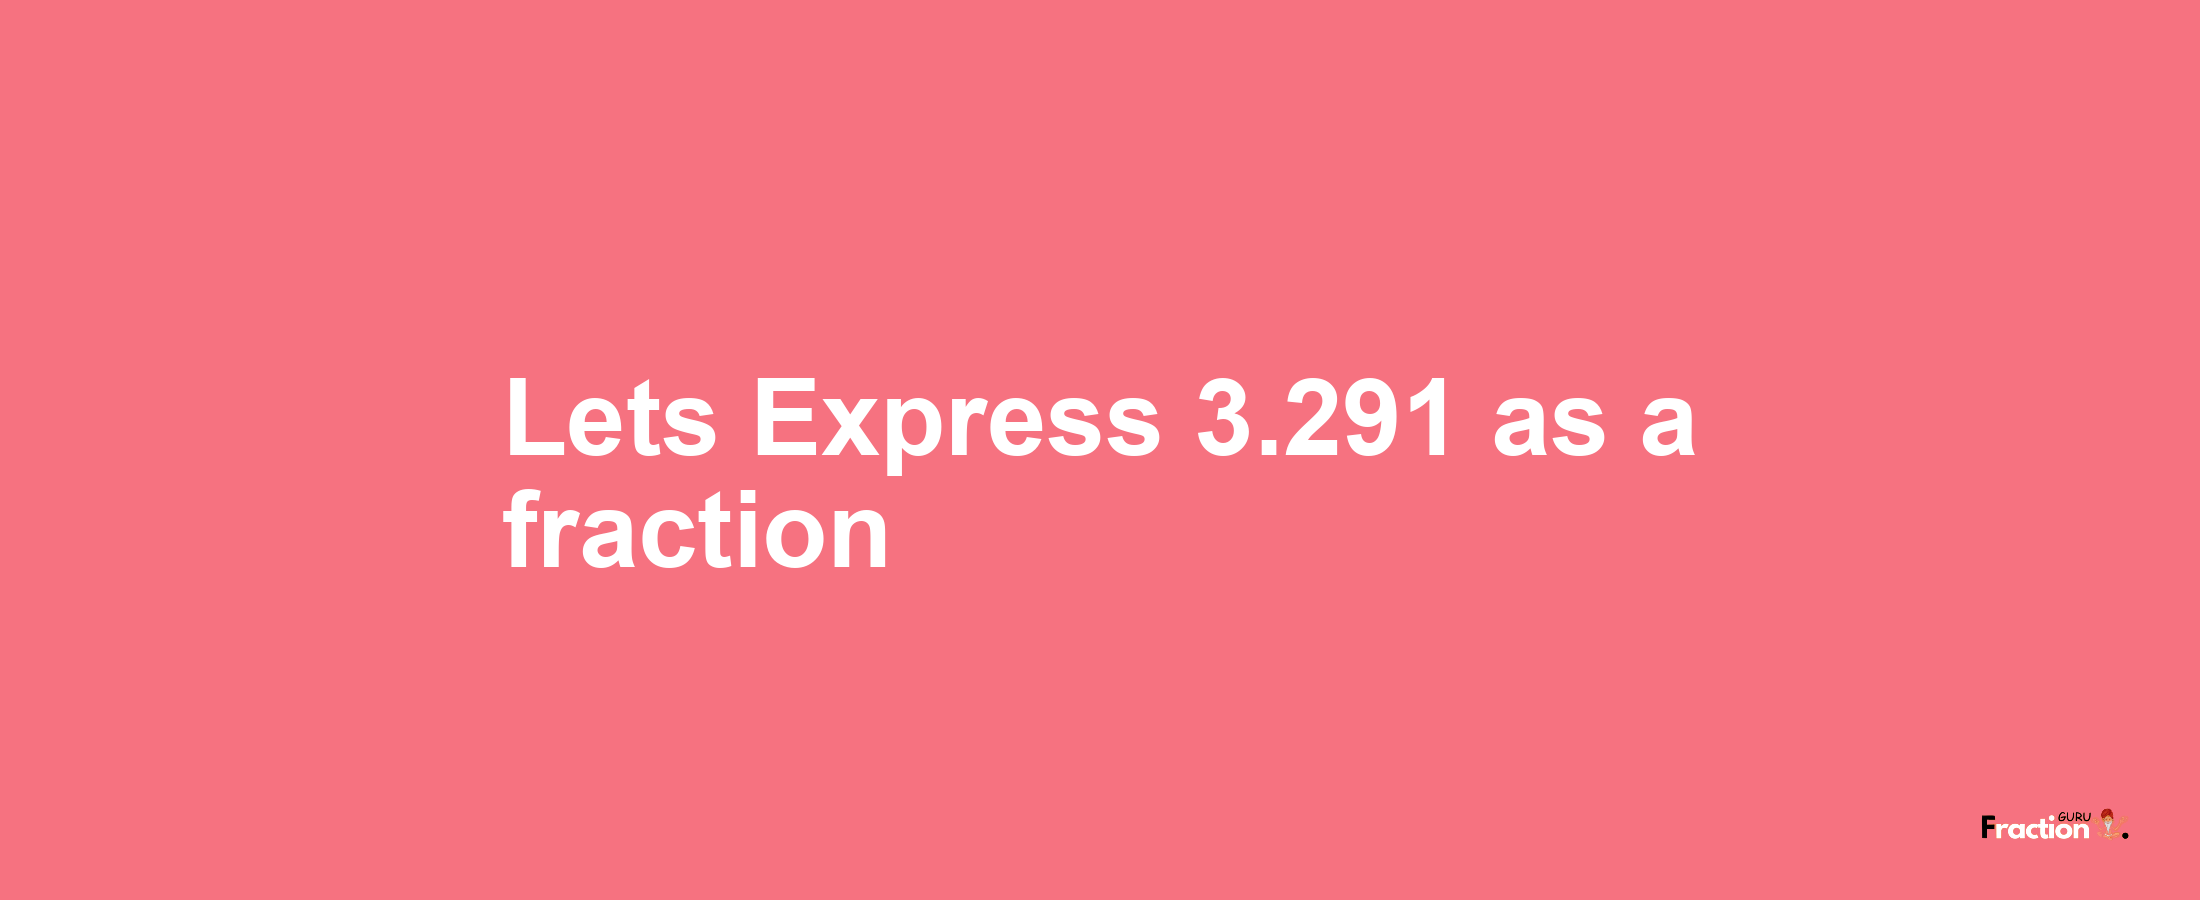 Lets Express 3.291 as afraction